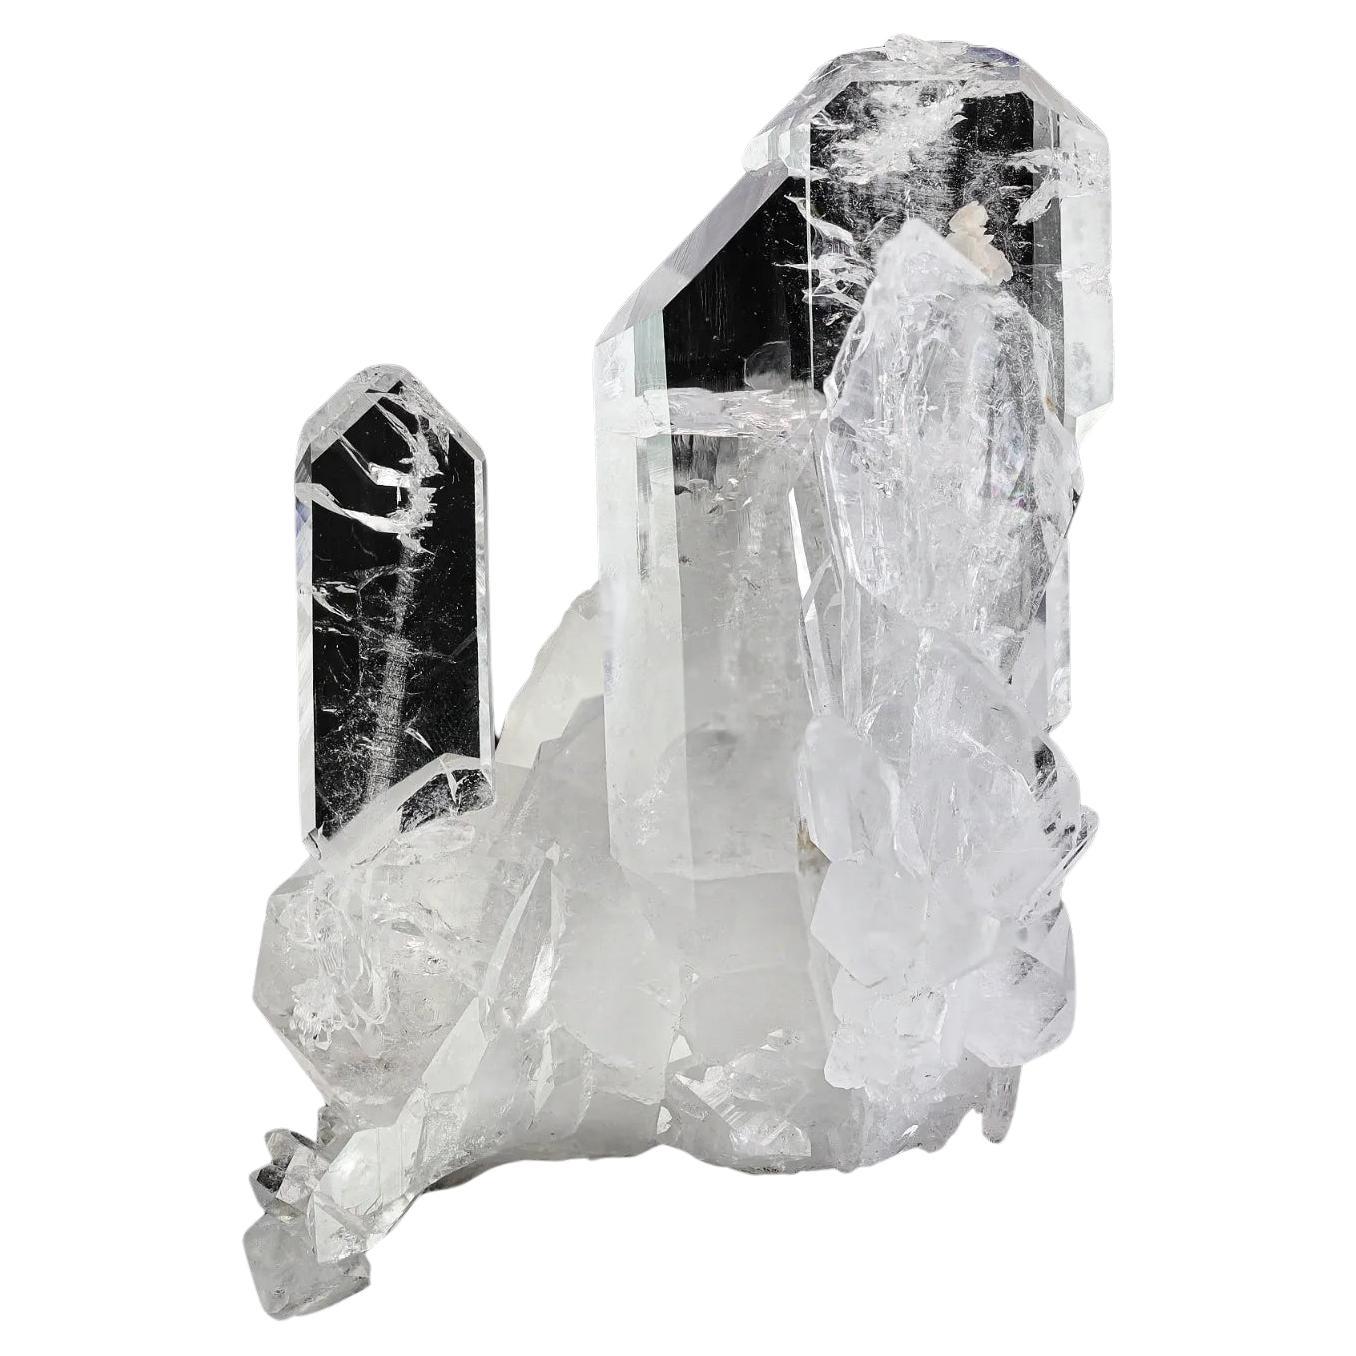 Artistic Formation Of Tabular Faden Clear Quartz Crystals Spacemen From Pakistan